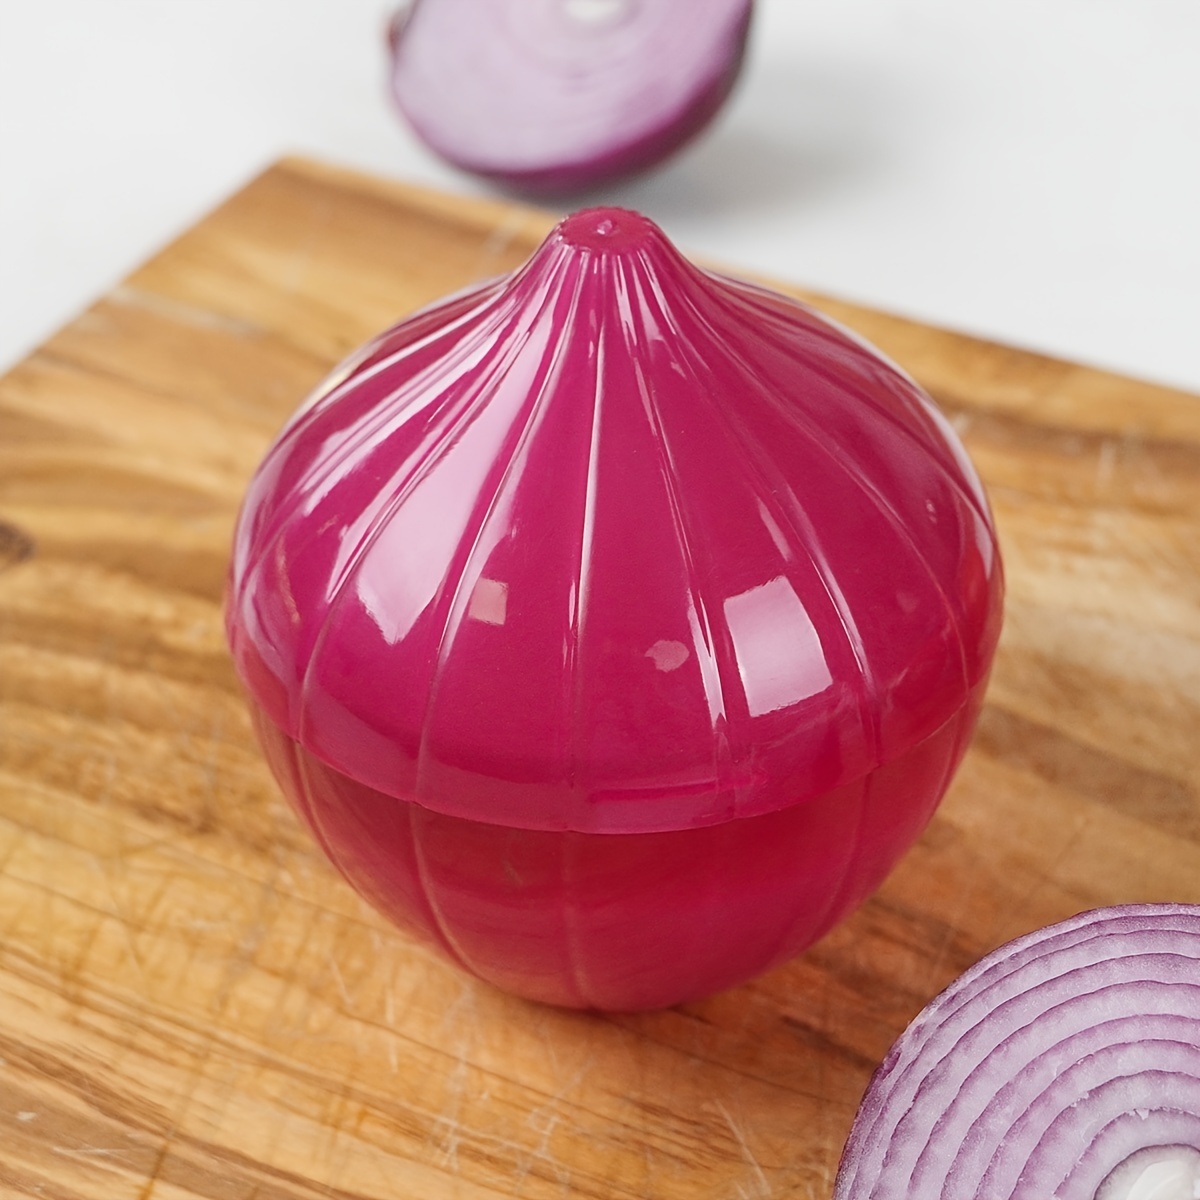 Hutzler Onion Saver Keeper Storage Container - Keeps Fresh Longer - Red